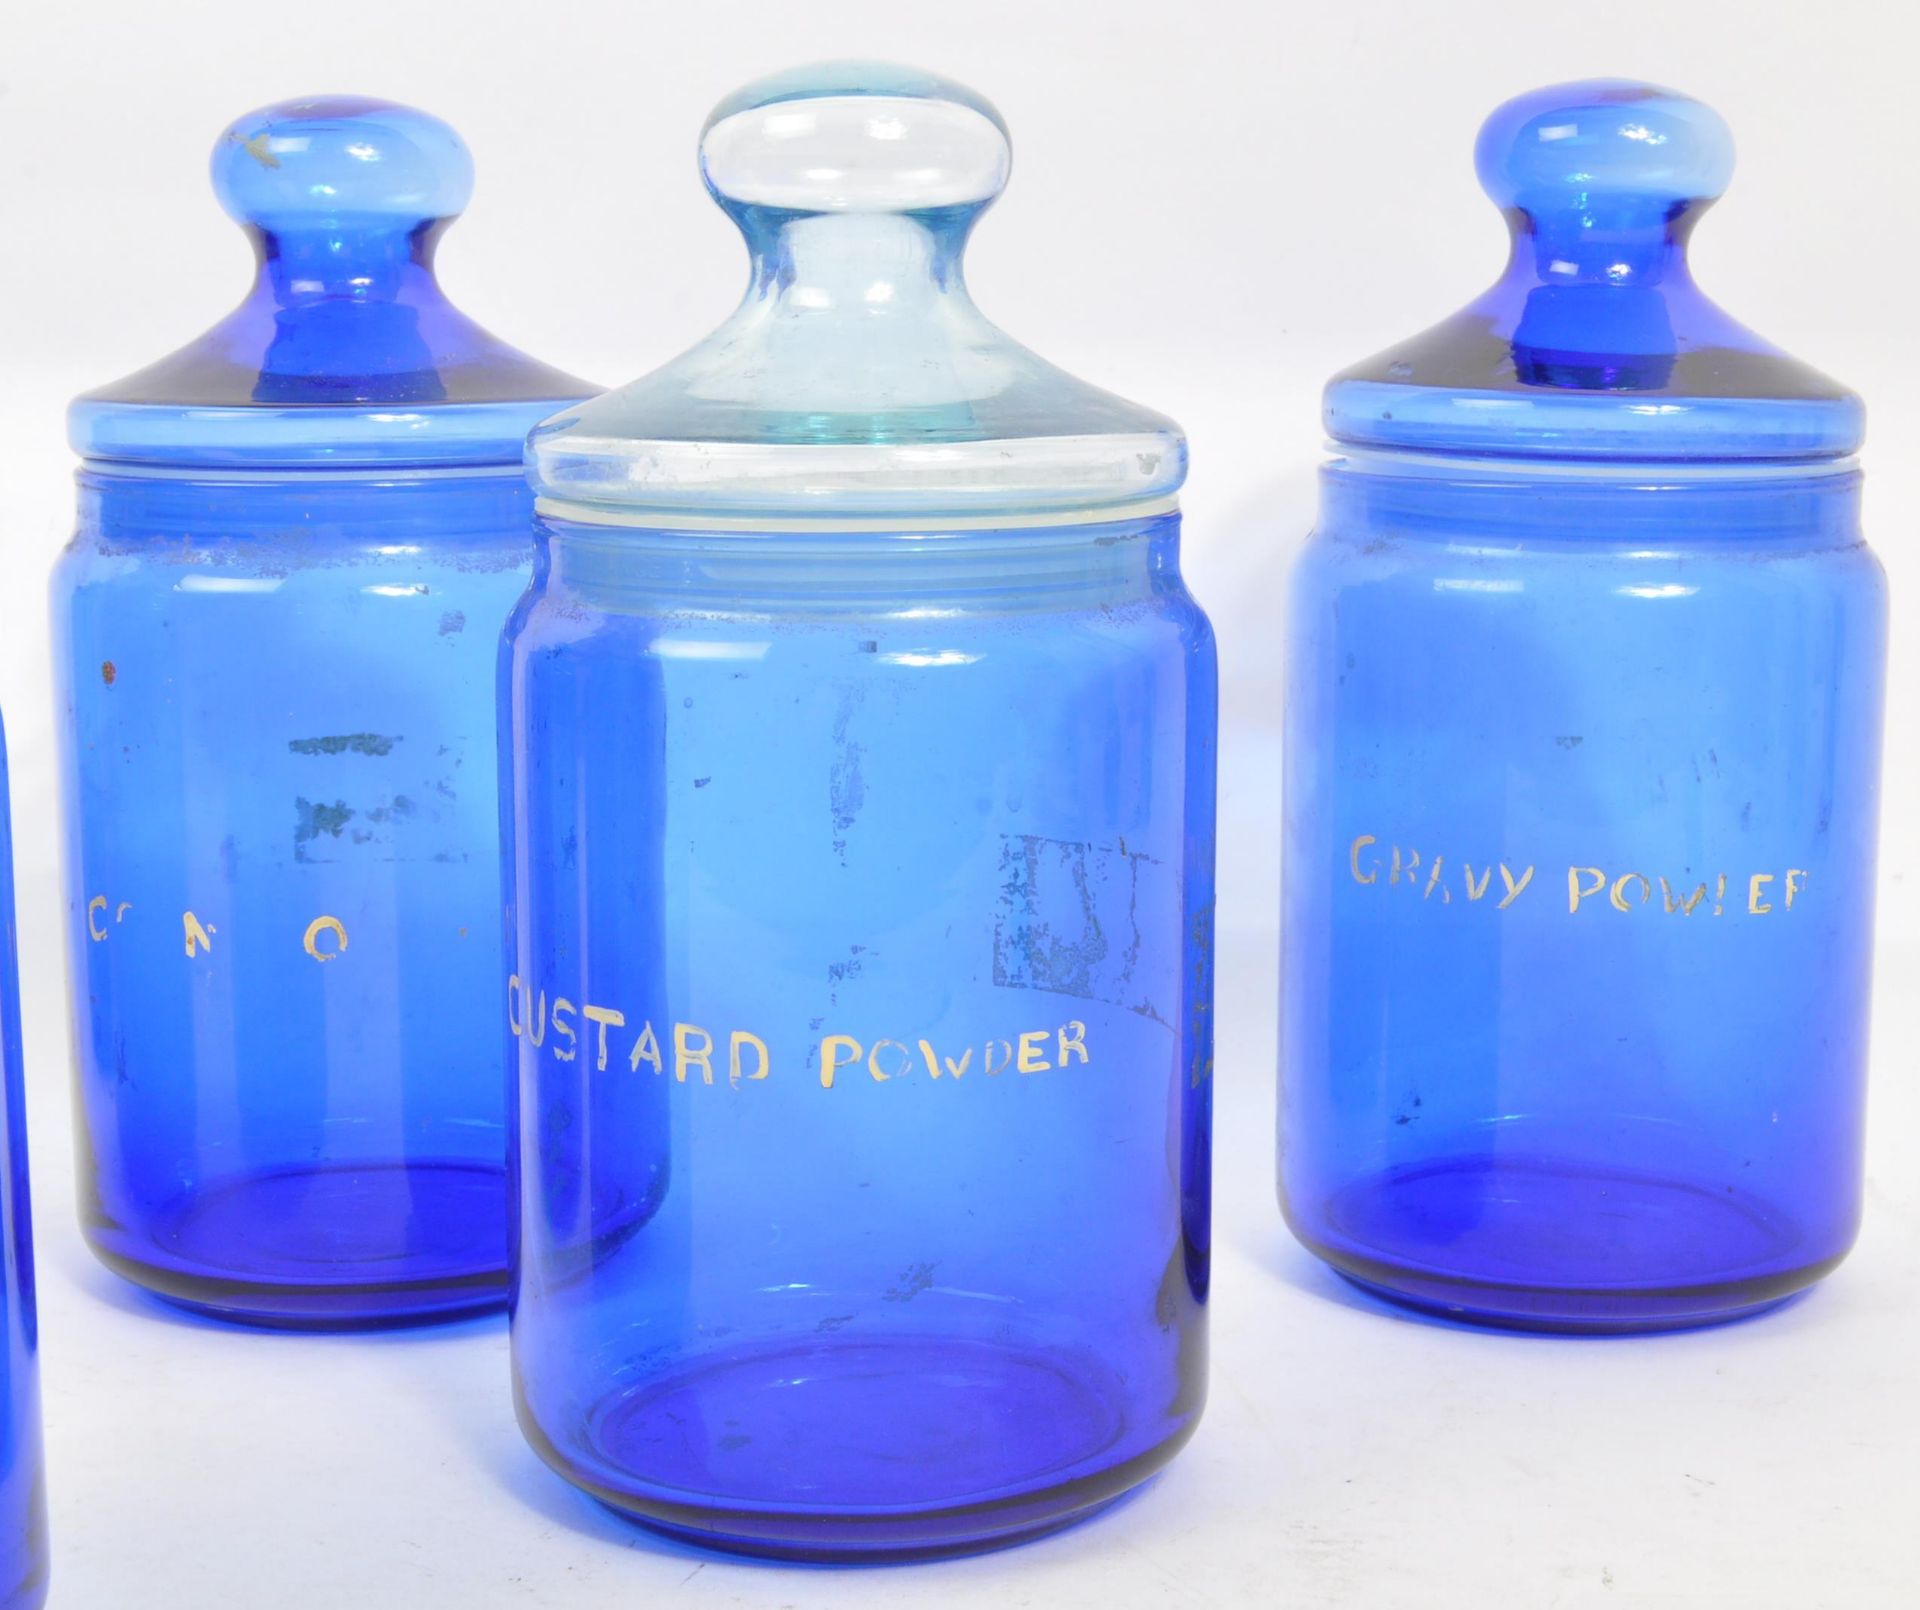 COLLECTION OF SIX FRENCH BLUE GLASS LIDDED JARS - Image 4 of 5